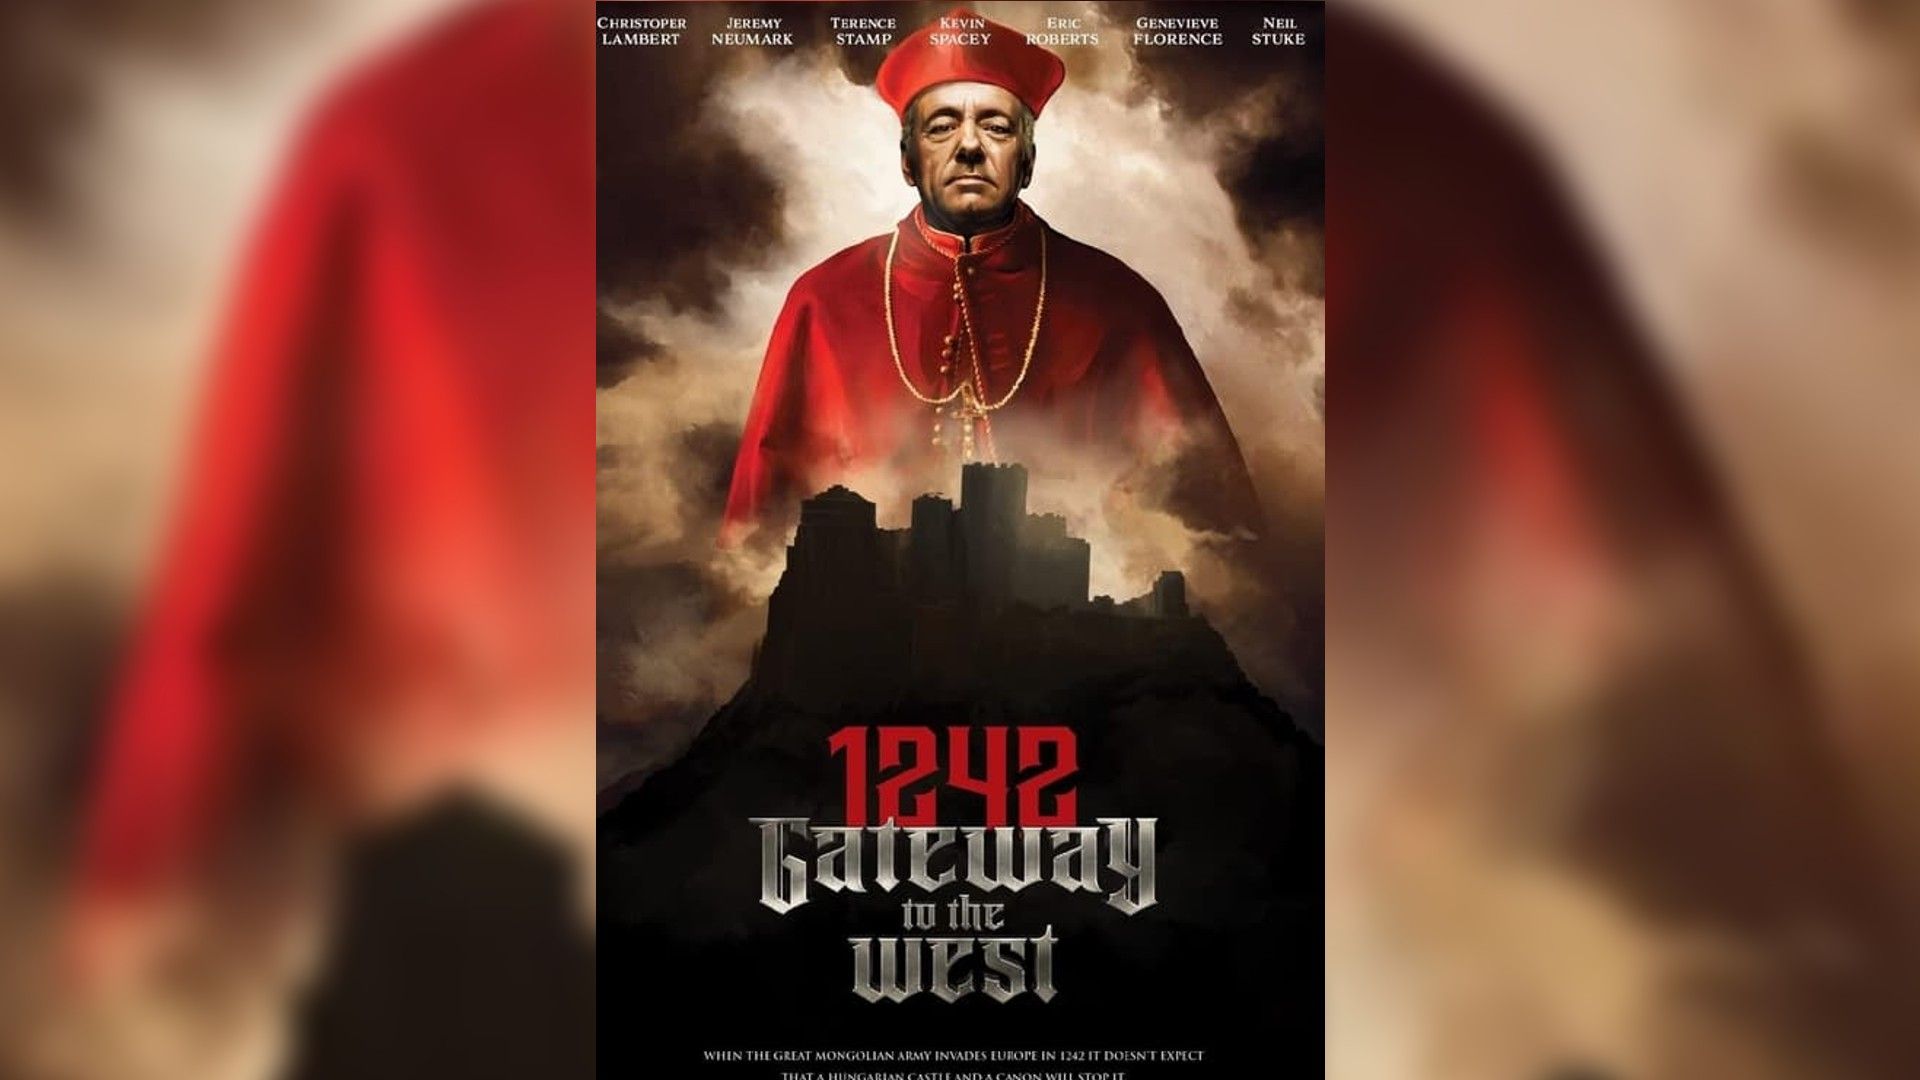 Kevin Spacey on 1242: Gateway to the West poster